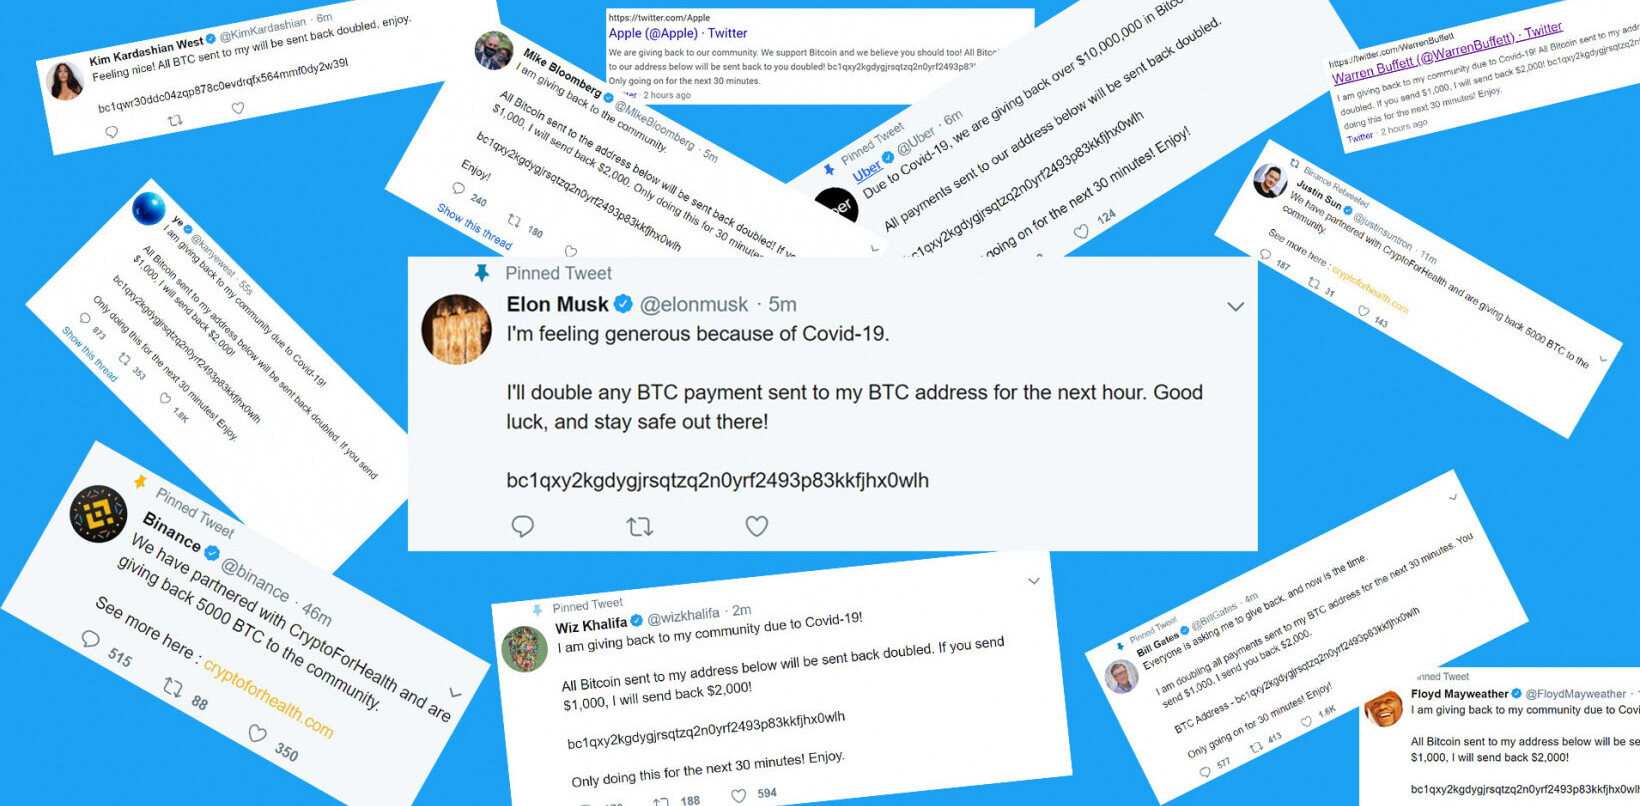 Hackers take over Obama, Musk, Apple, and dozens more Twitter accounts in massive Bitcoin scam